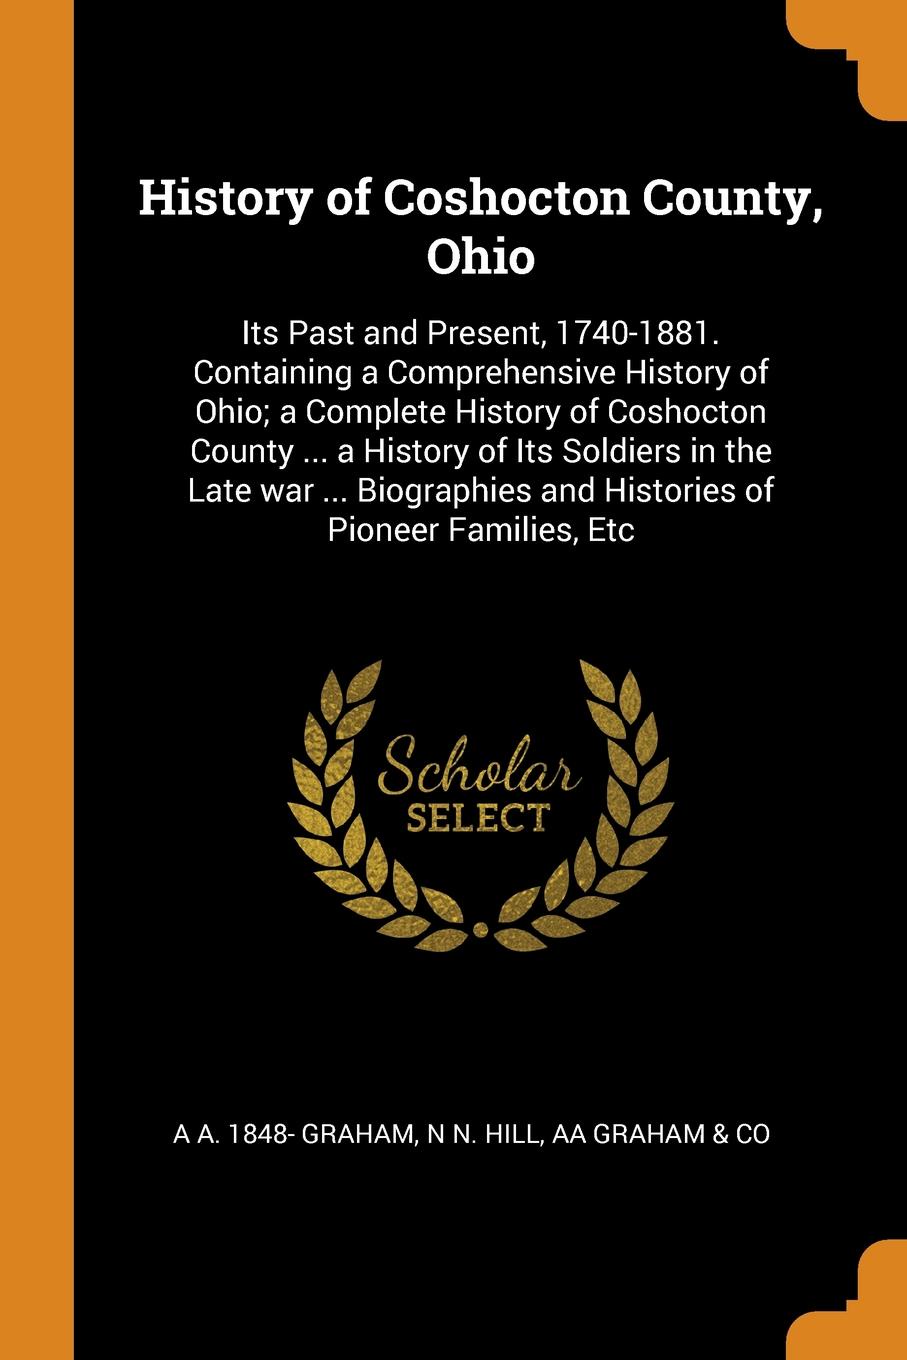 History of Coshocton County, Ohio. Its Past and Present, 1740-1881. Containing a Comprehensive History of Ohio; a Complete History of Coshocton County ... a History of Its Soldiers in the Late war ... Biographies and Histories of Pioneer Families,...